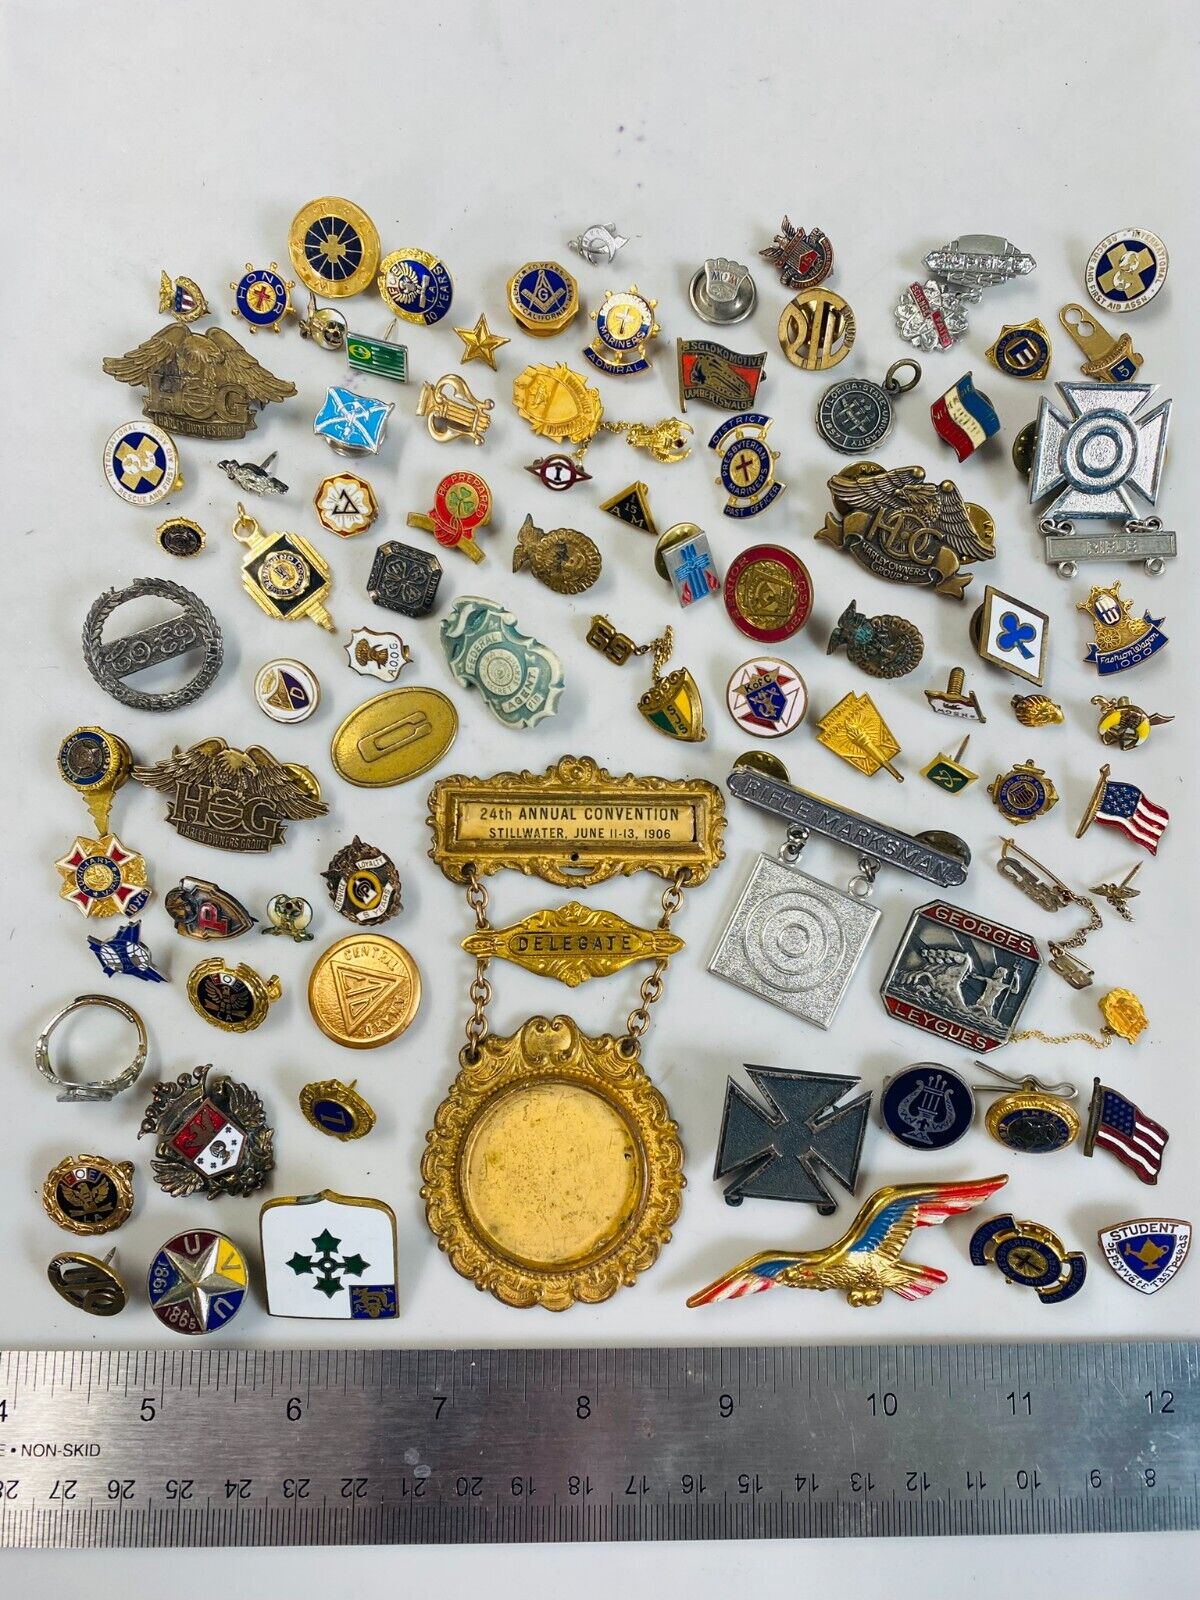 Collection Lot Vintage + Antique Fraternal Pins Jewelry and Memorabilia - Q7